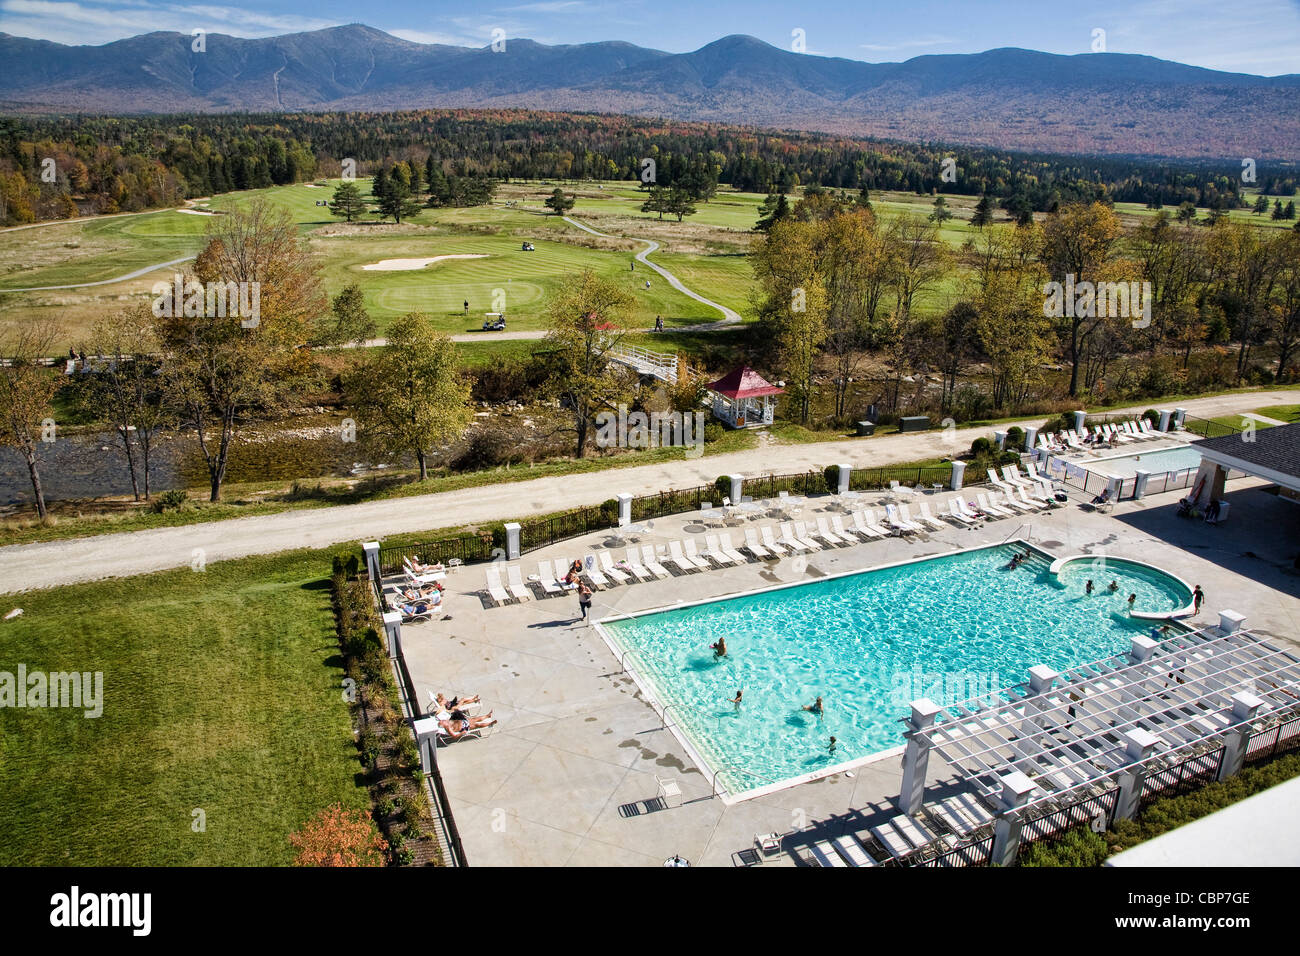 The pool and golf course at the Omni Mount Washington Resort below Mount Washington at Bretton Woods, New Hampshire. Stock Photo